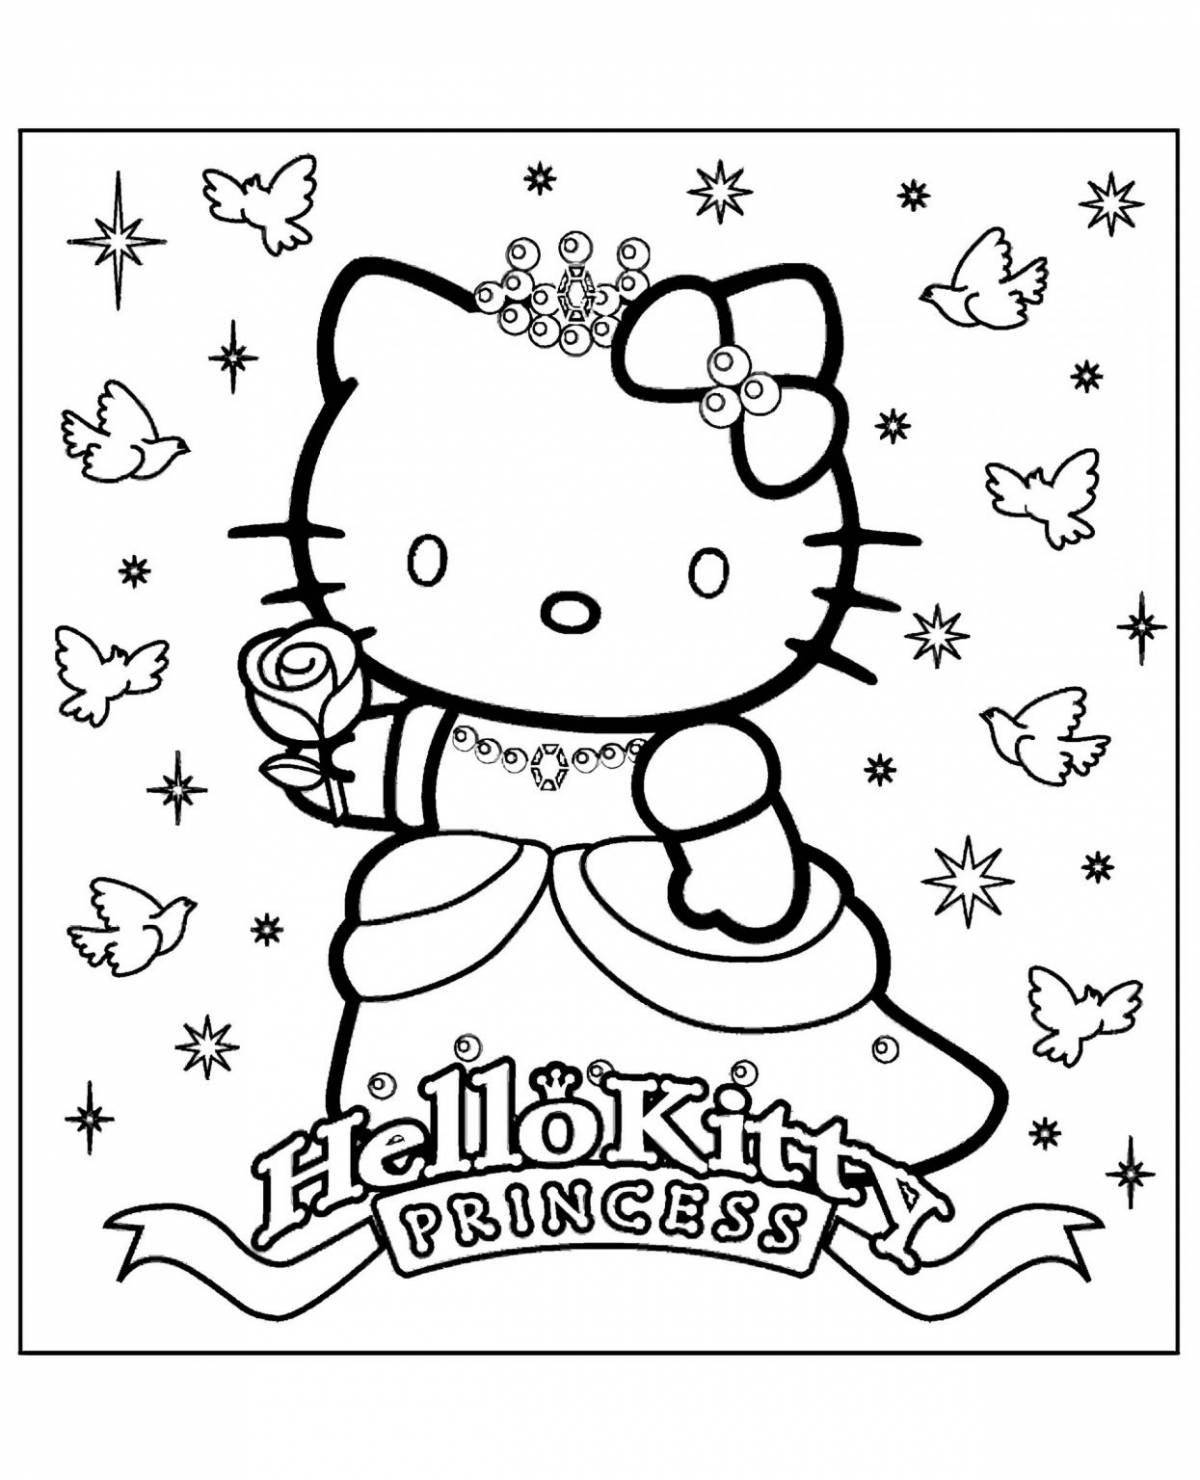 Playful hello kitty money coloring page